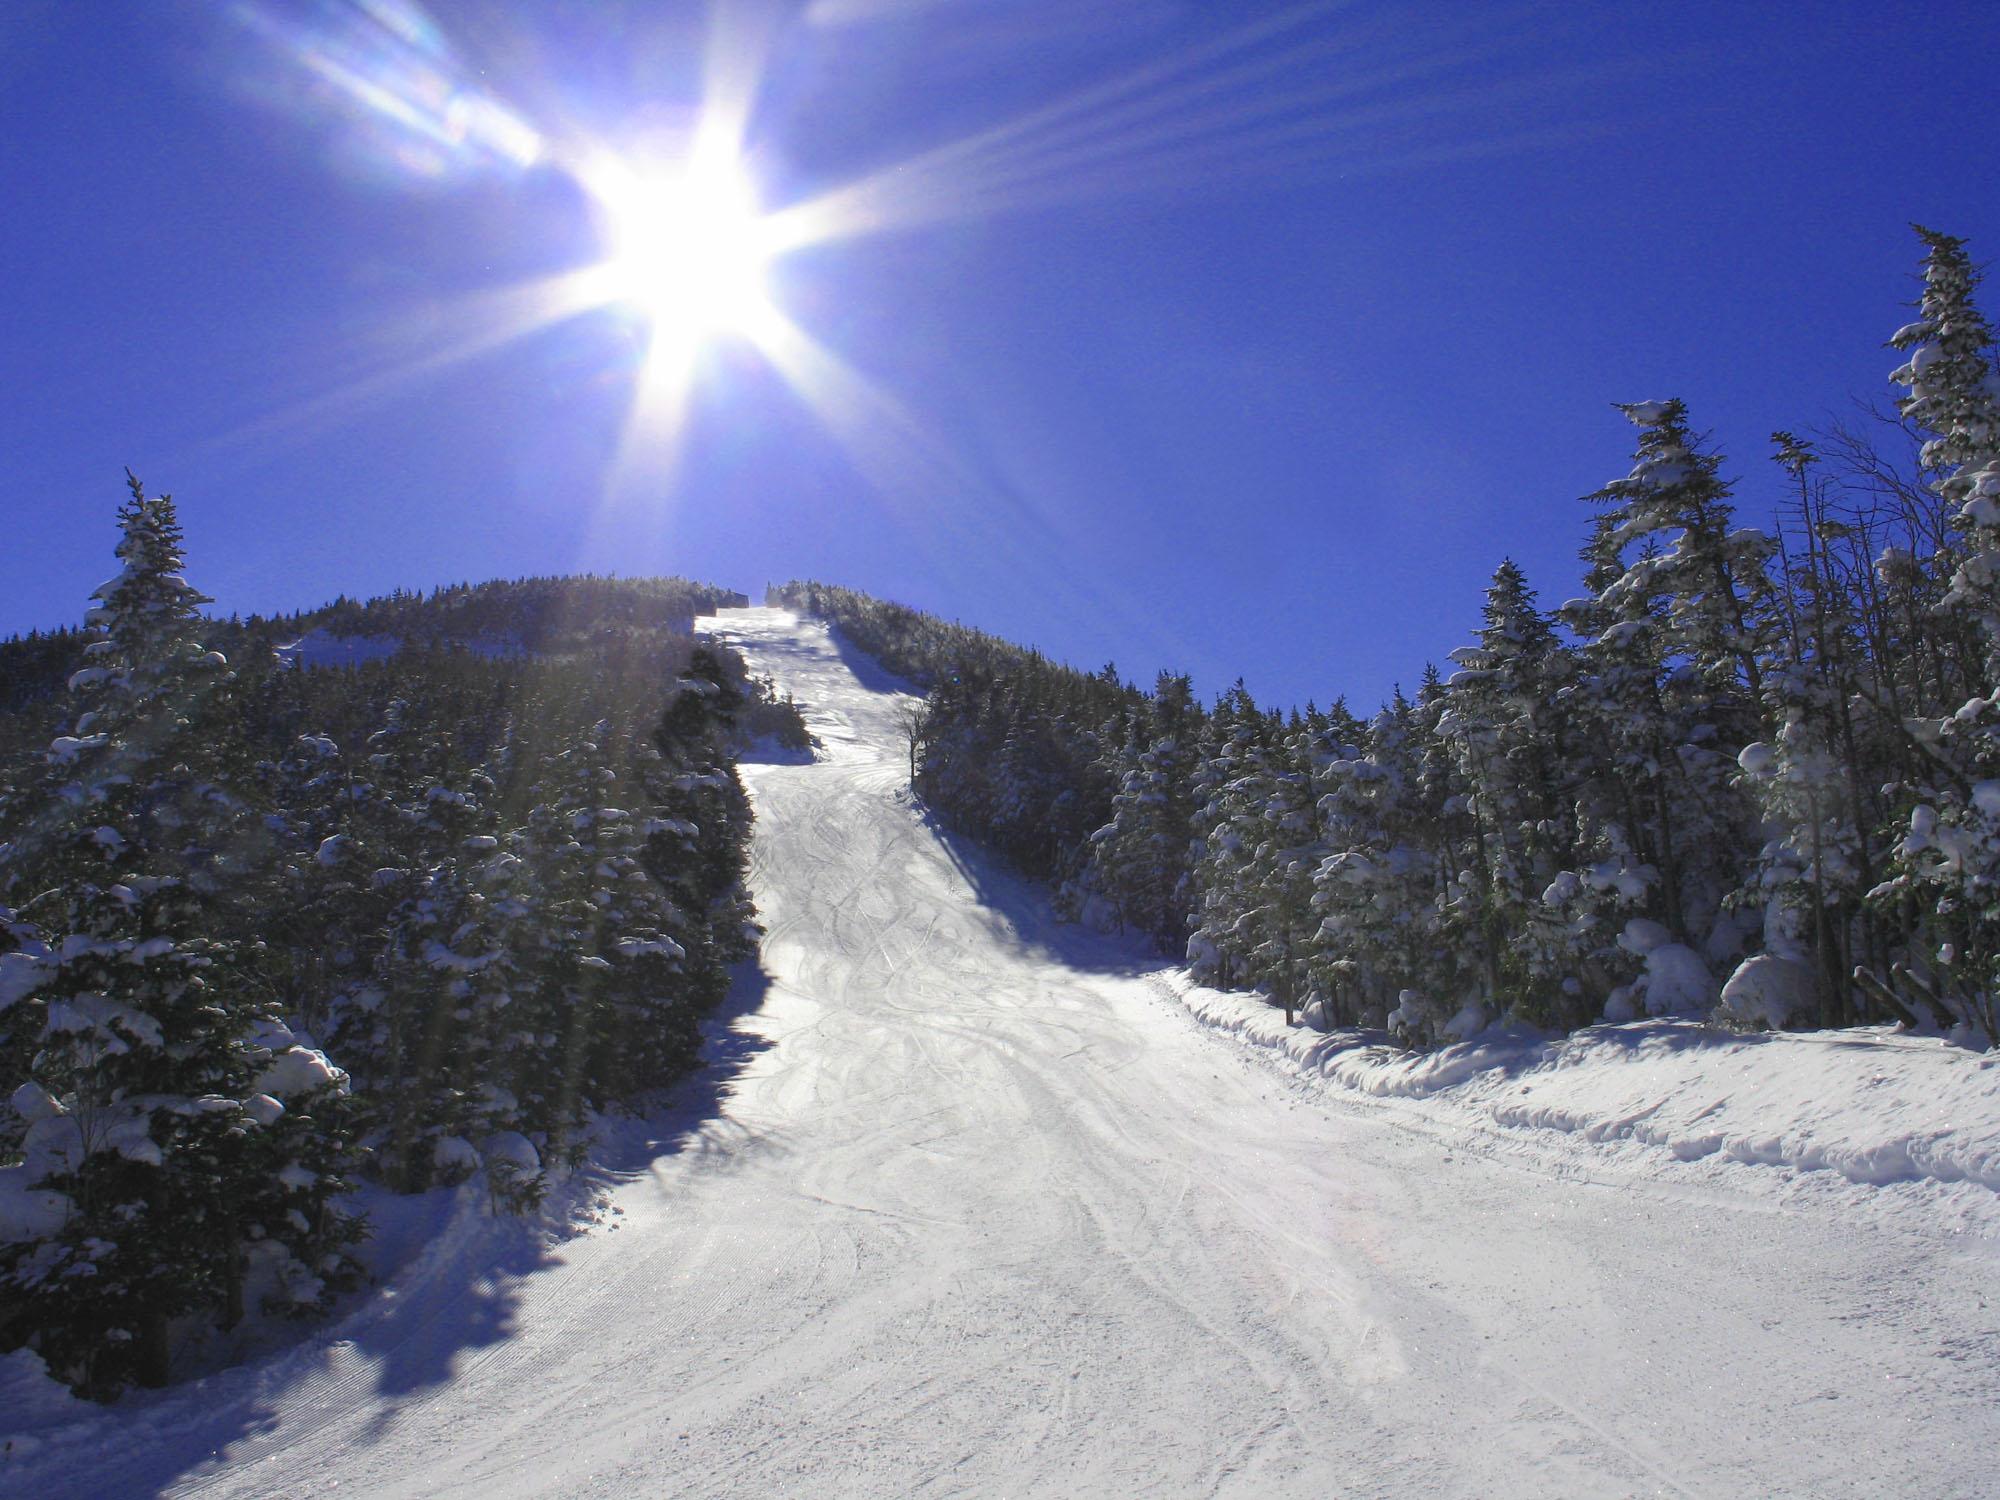 Spring Skiing at Cannon Mountain (user submitted)